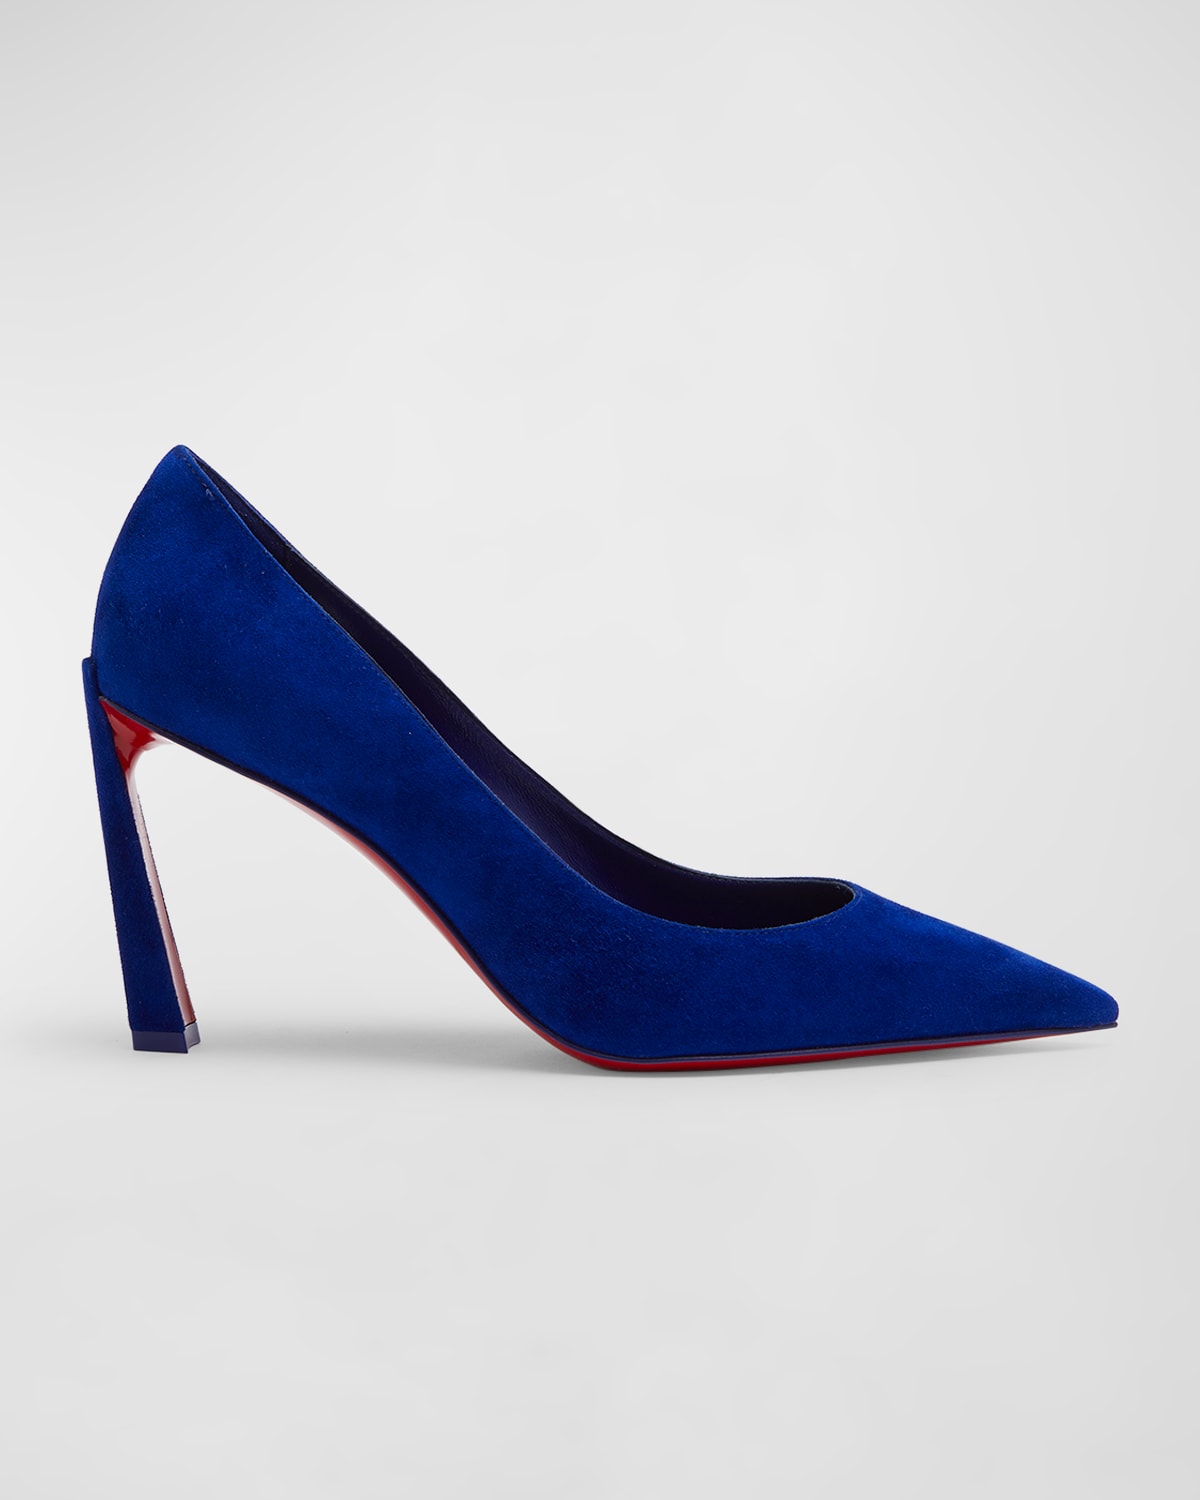 Christian Louboutin, Shoes, Blue Suede Red Bottom